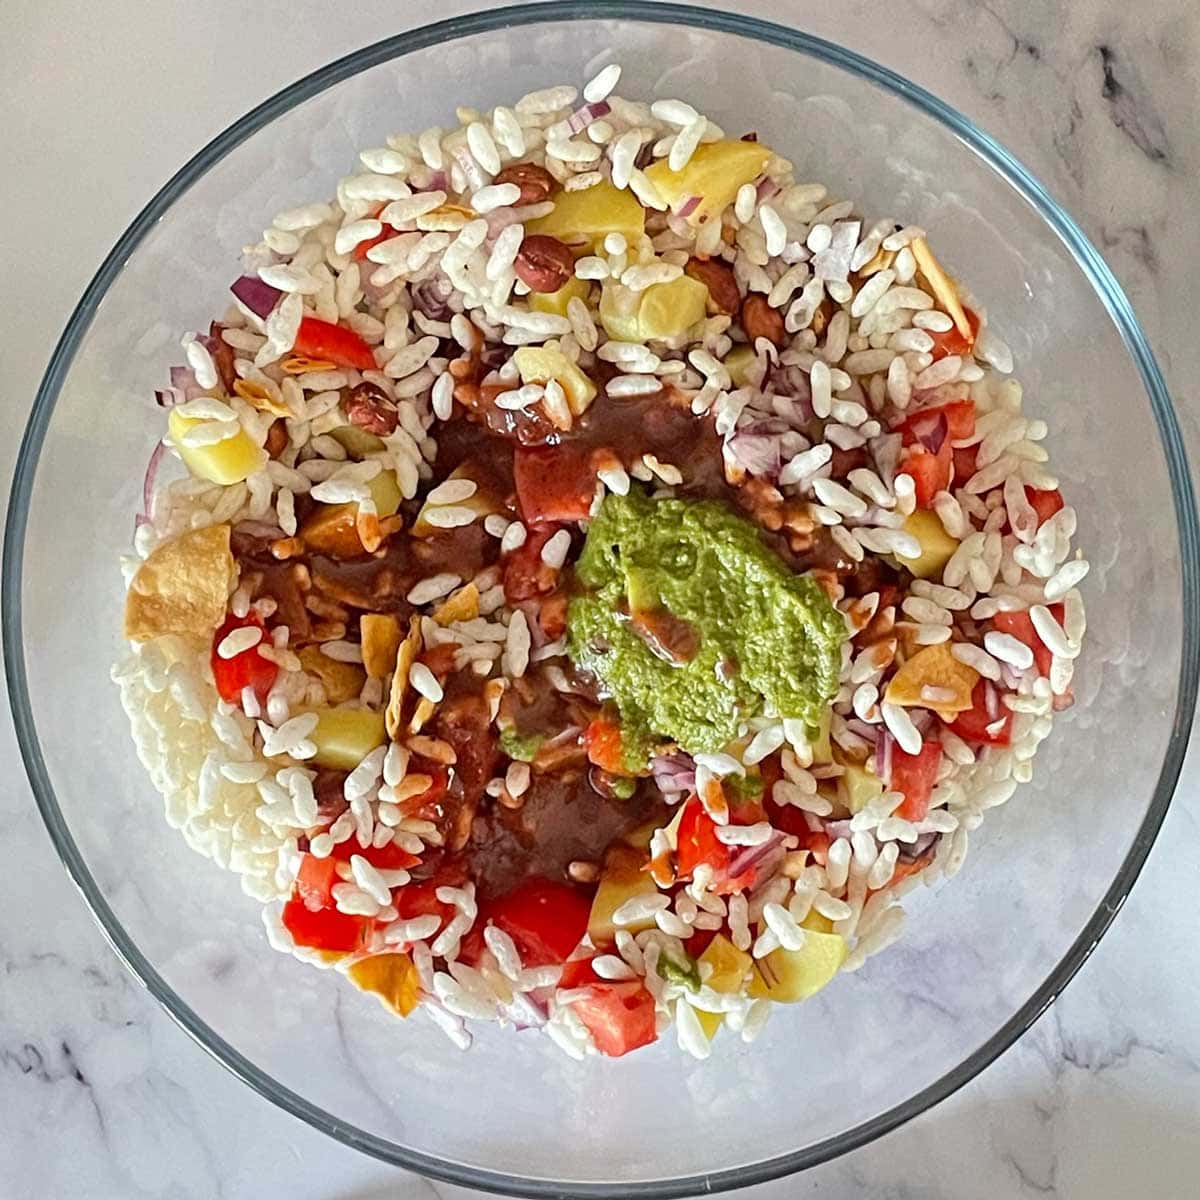 Bhel chutney mix in a glass mixing bowl.